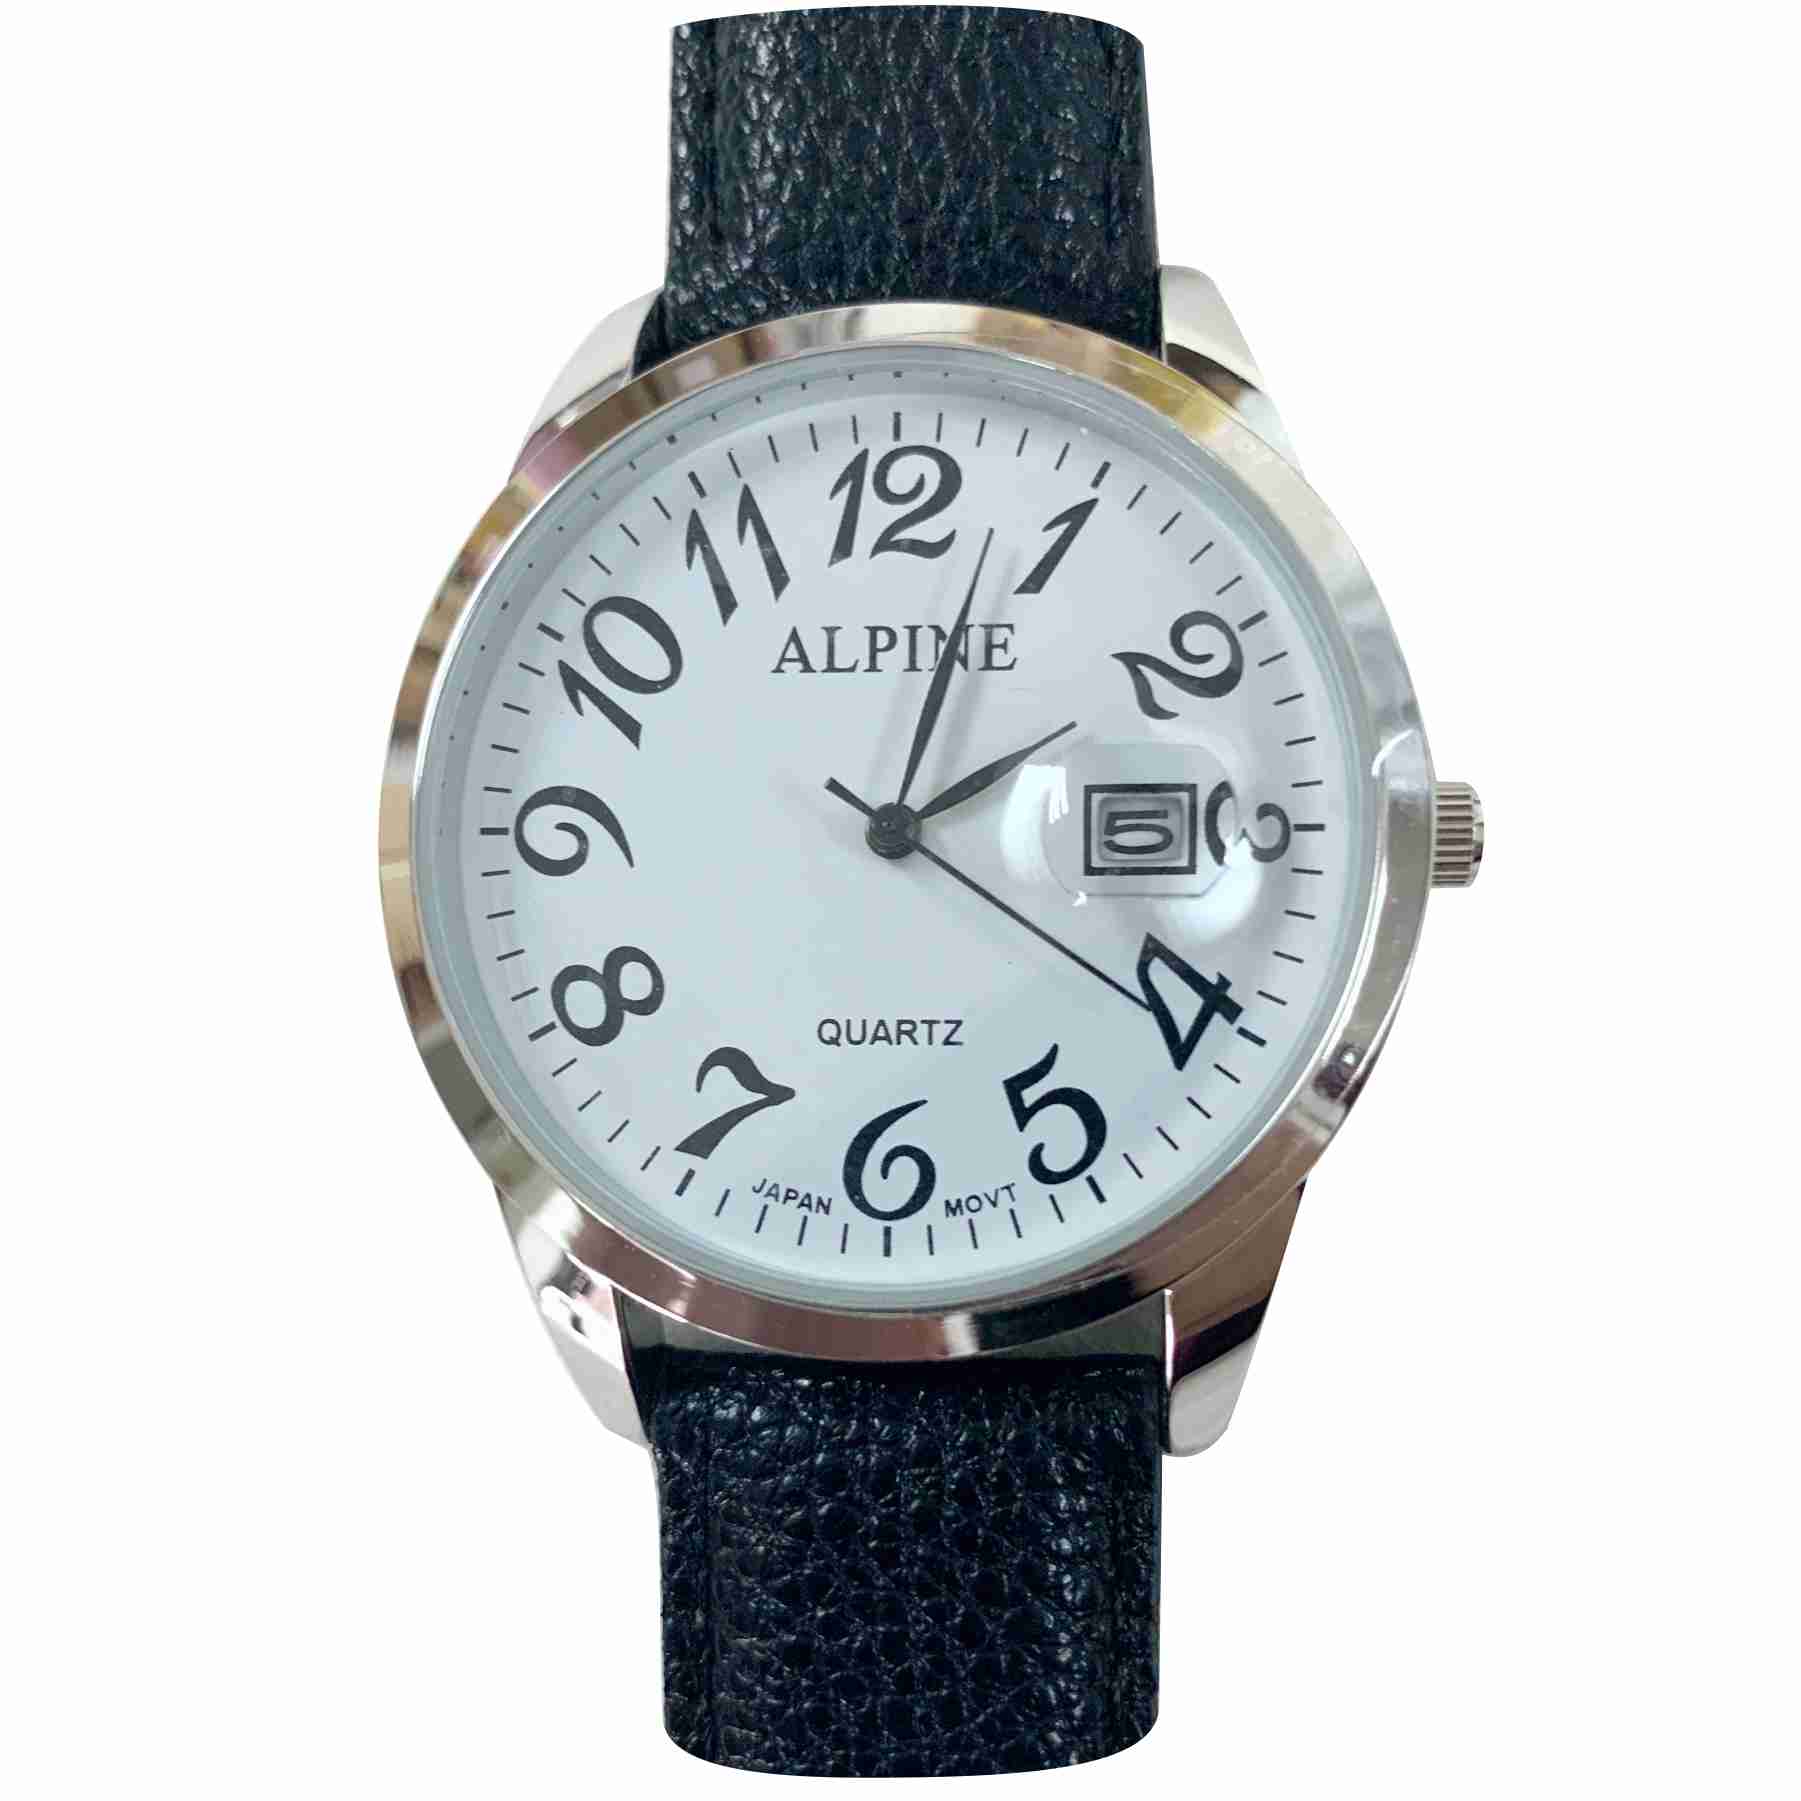 Mens Band Watch - Script Black with Date